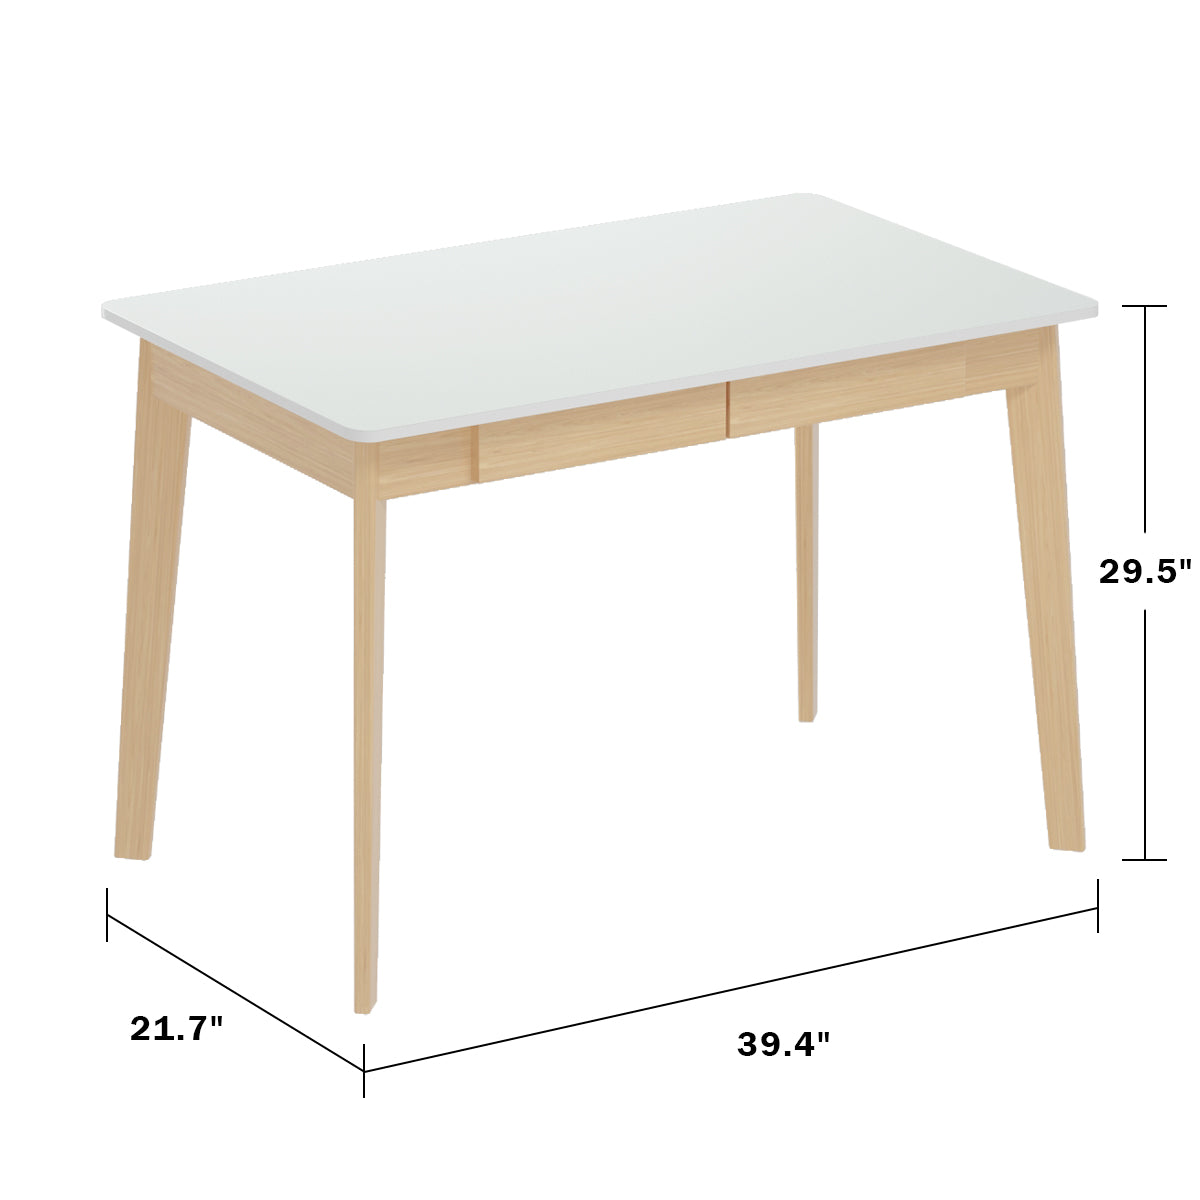 Wooden Minimalist Writing Desk White Study Table for Office 39.4"W